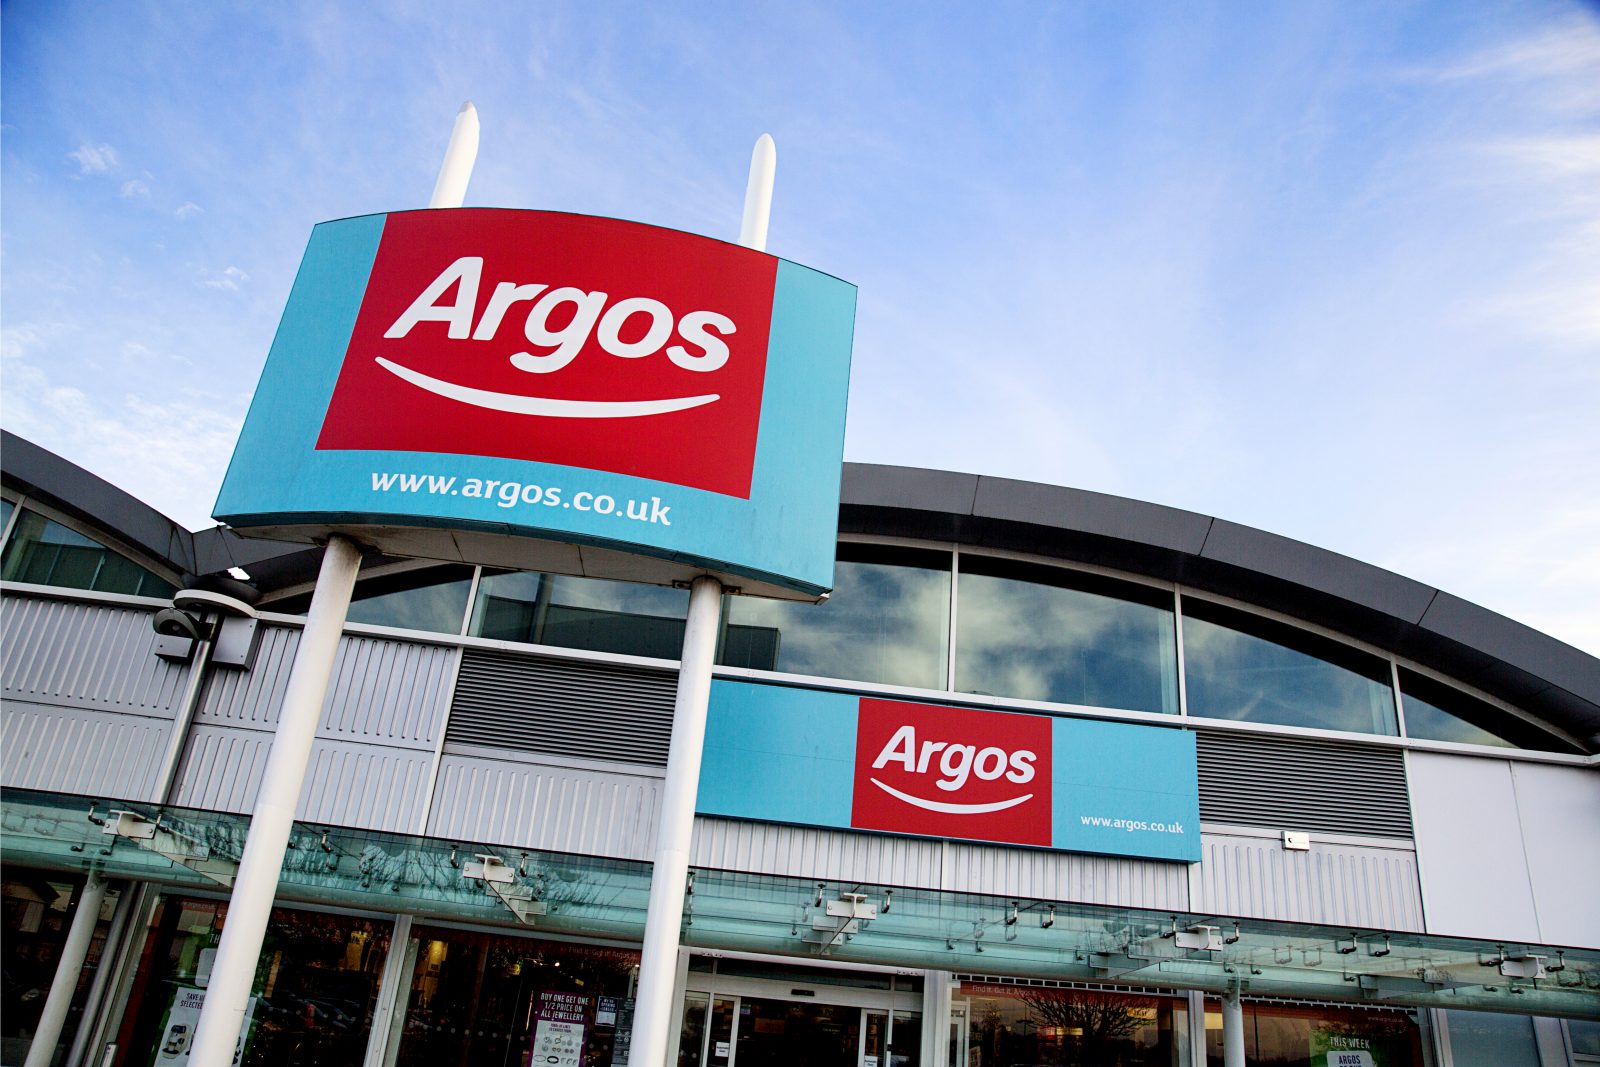 Argos Returns and Refunds (2018 Guide)